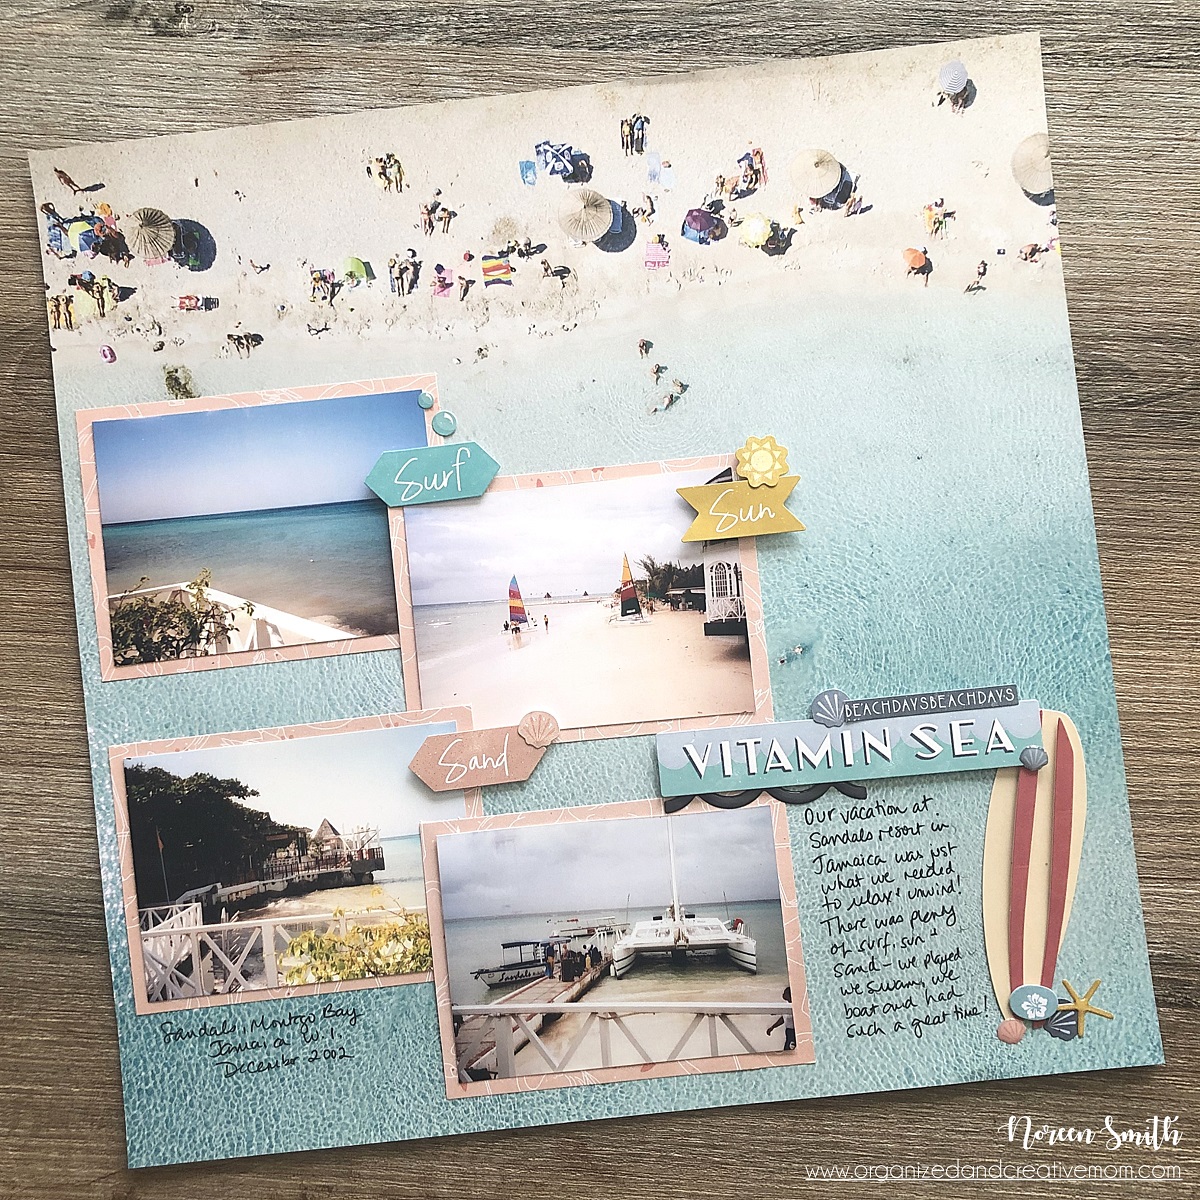 Photographic Background Paper by Creative Memories for 12X12 Scrapbook Layouts Designed by Noreen Smith | Creative Scrapbooker Magazine